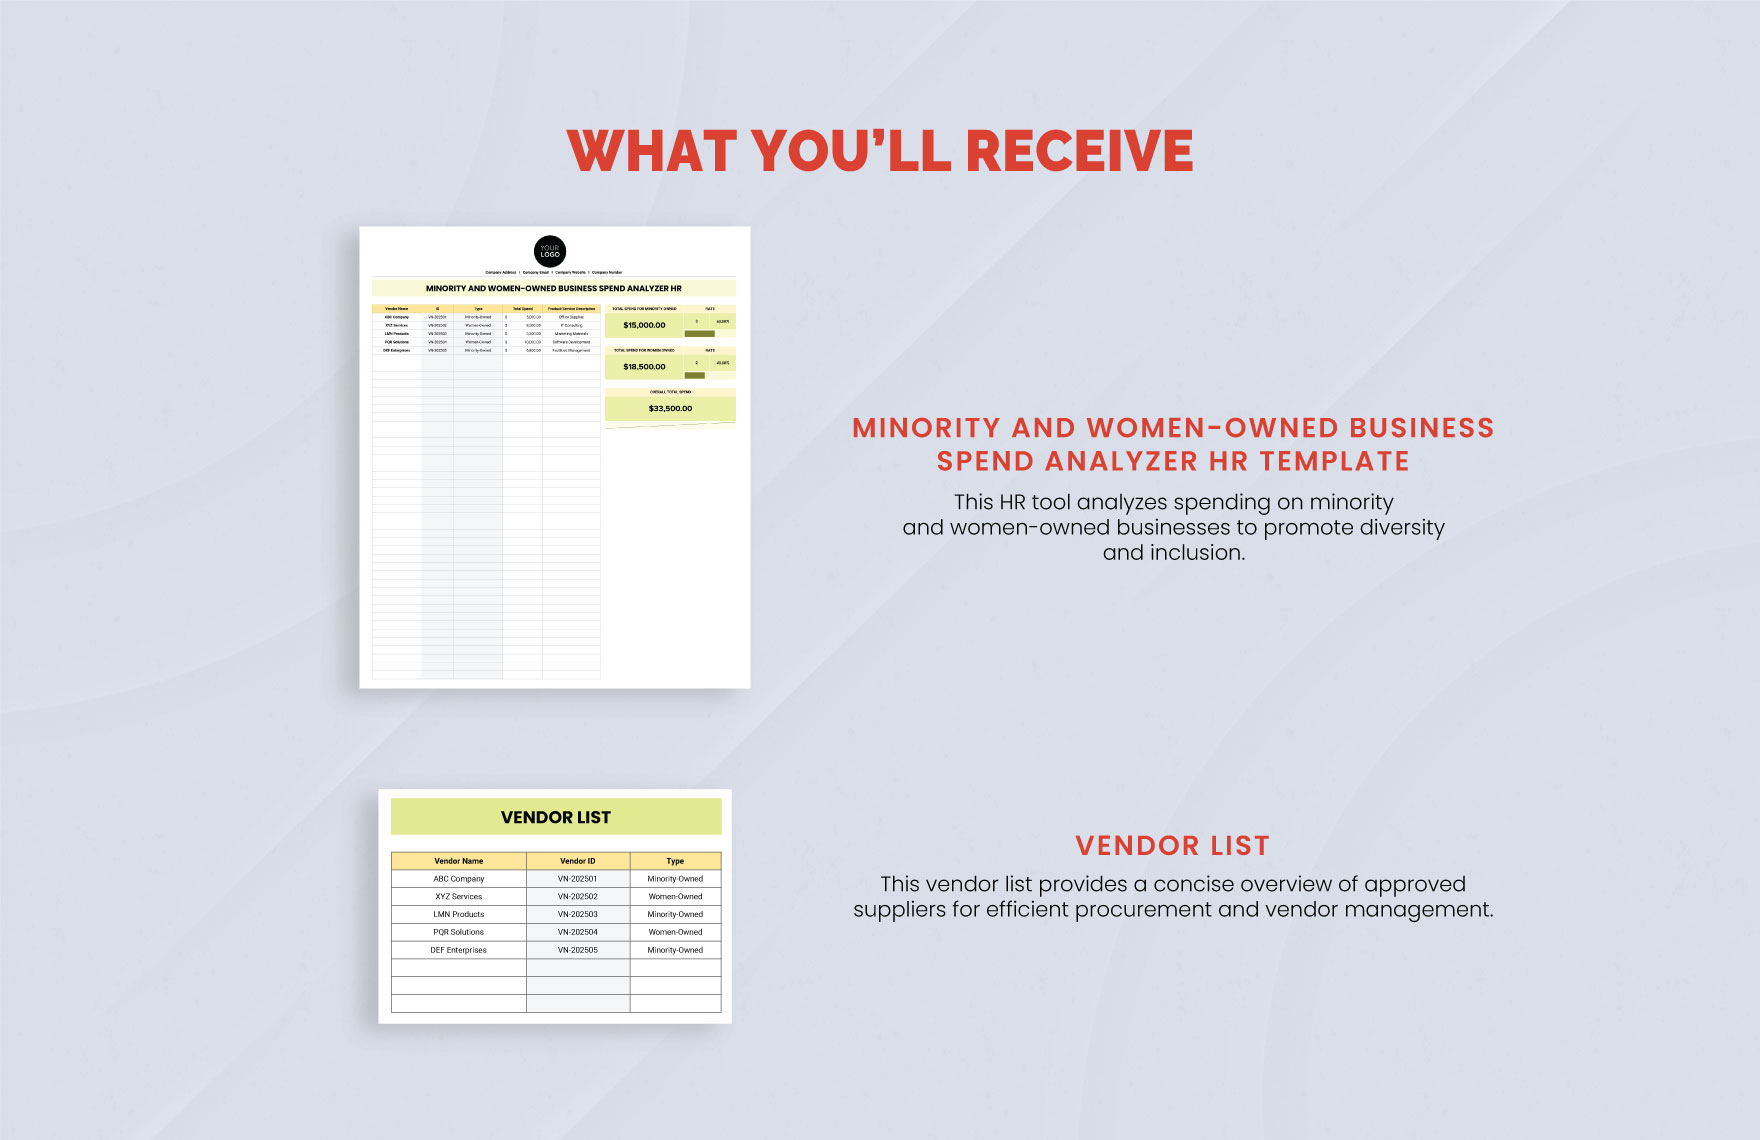 Minority and Women-Owned Business Spend Analyzer HR Template